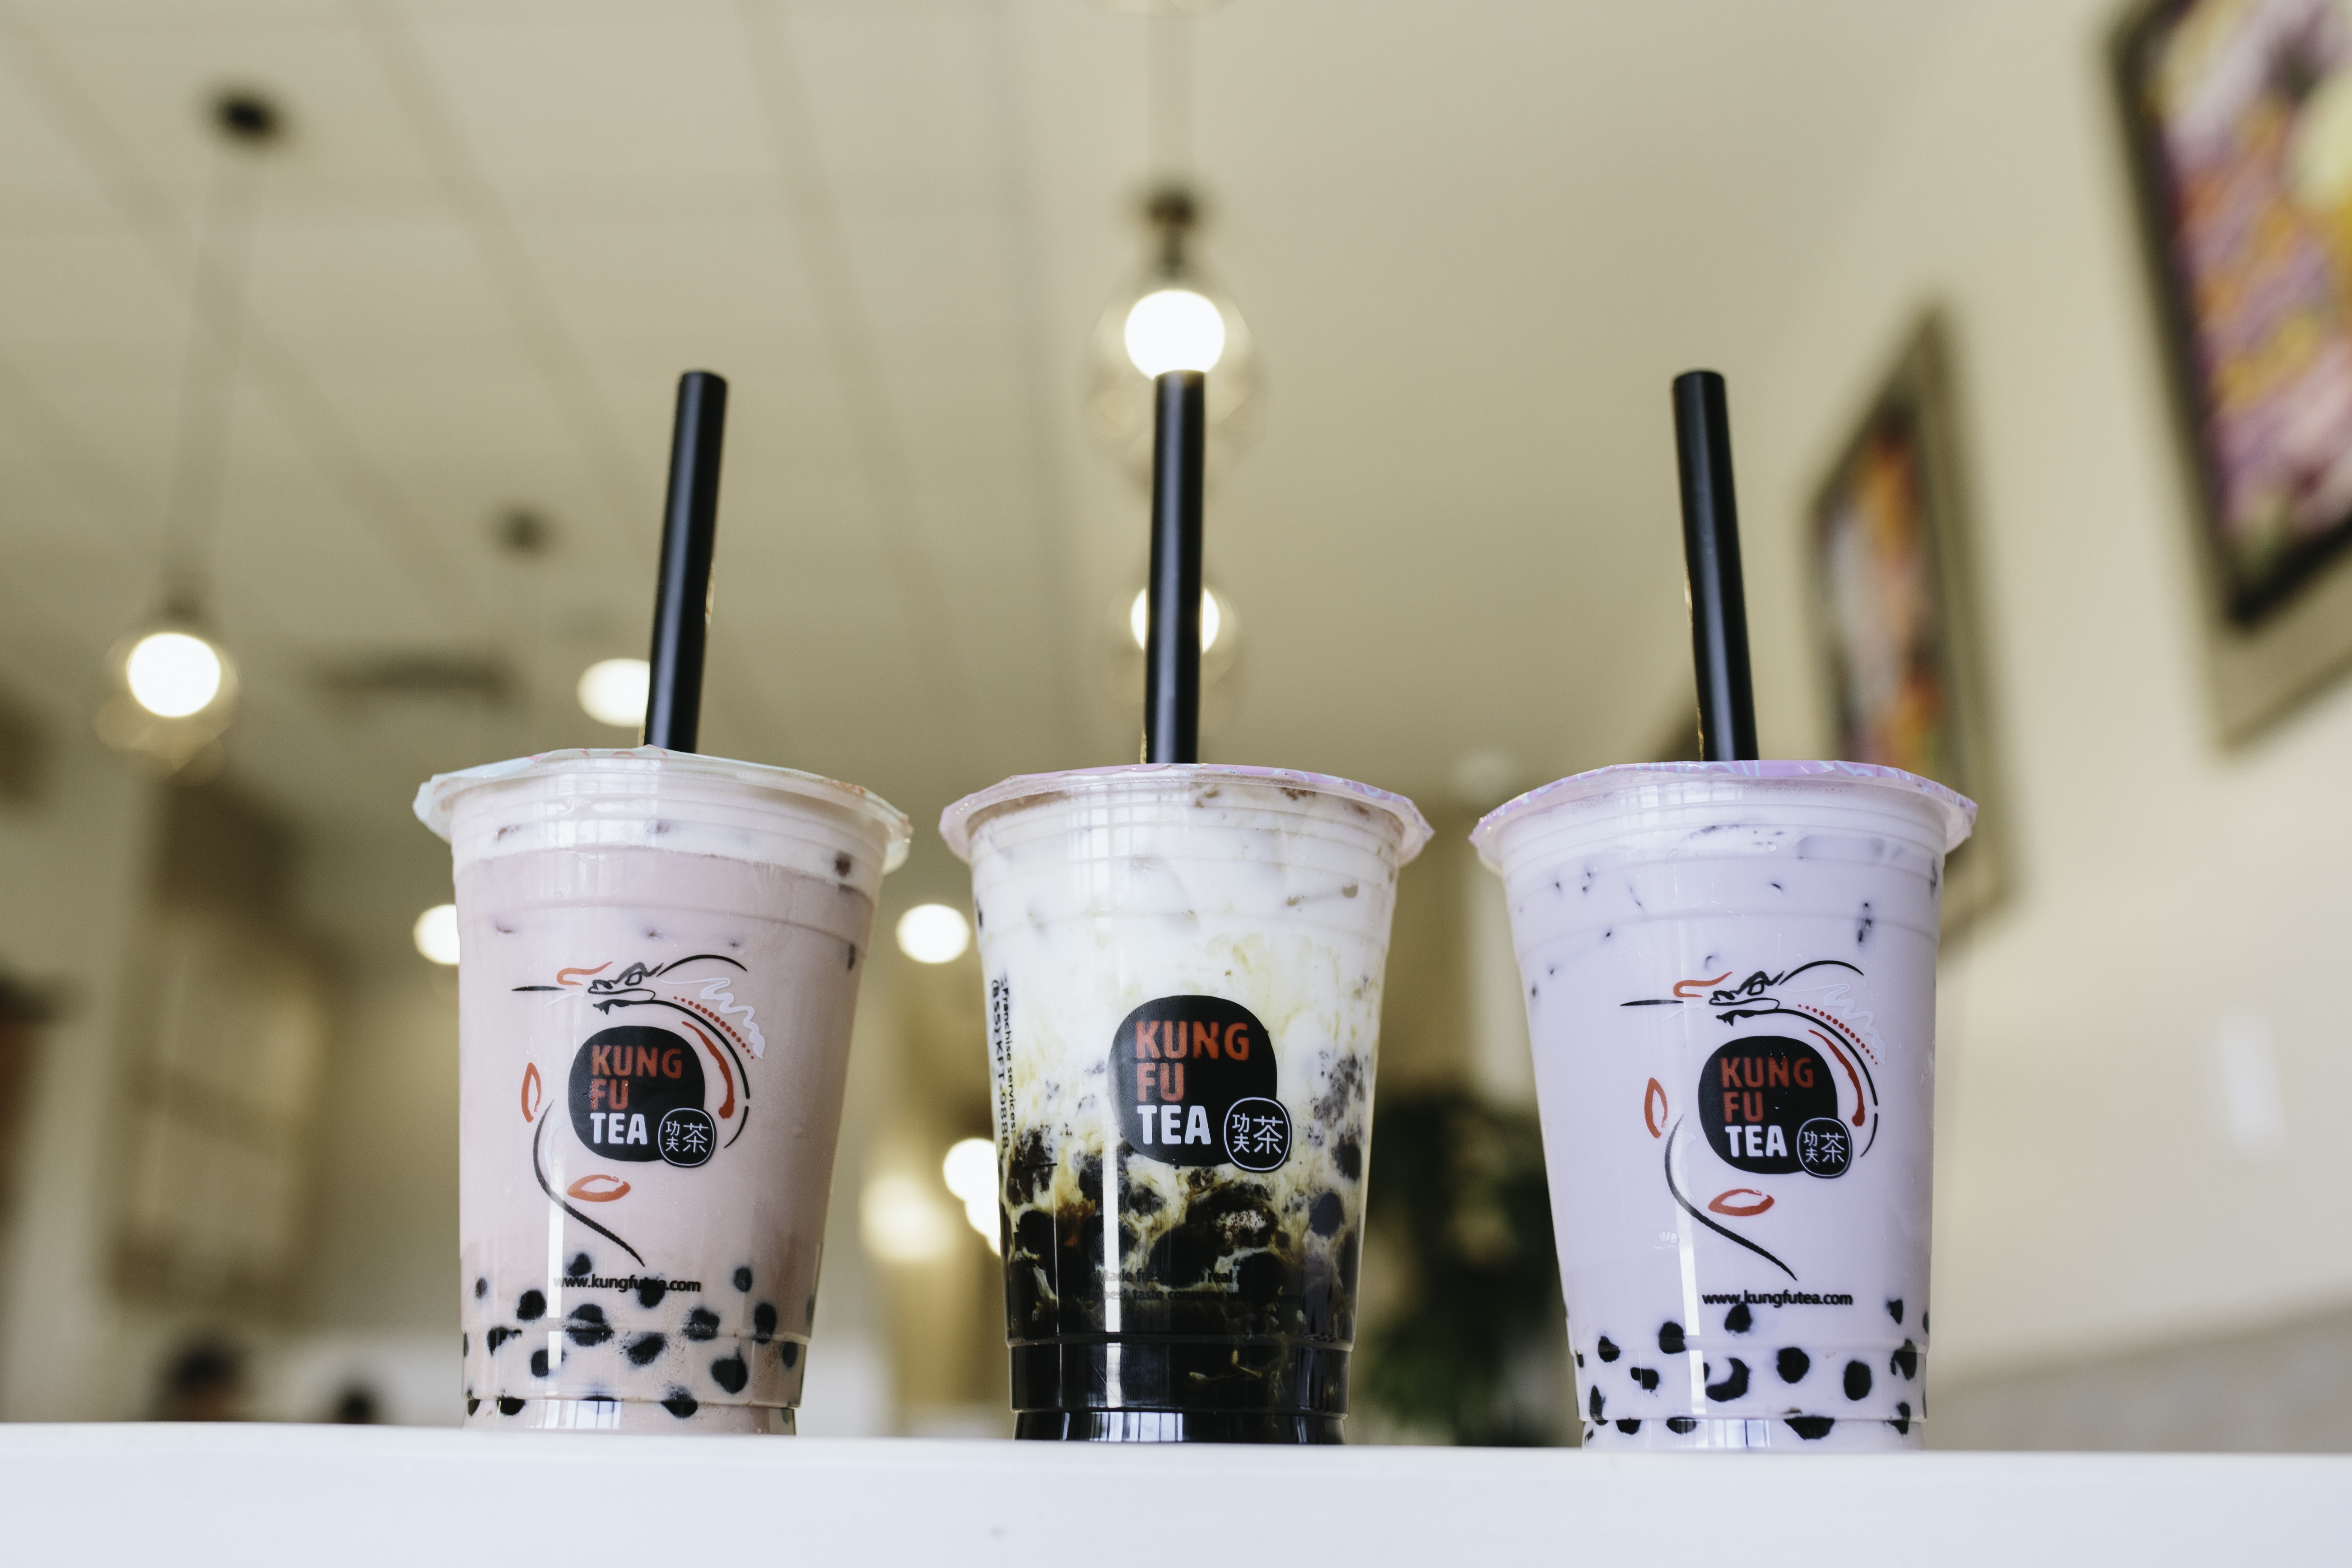 Boba, bubbles and a whole lot of good: all about bubble tea in Baton Rouge ...